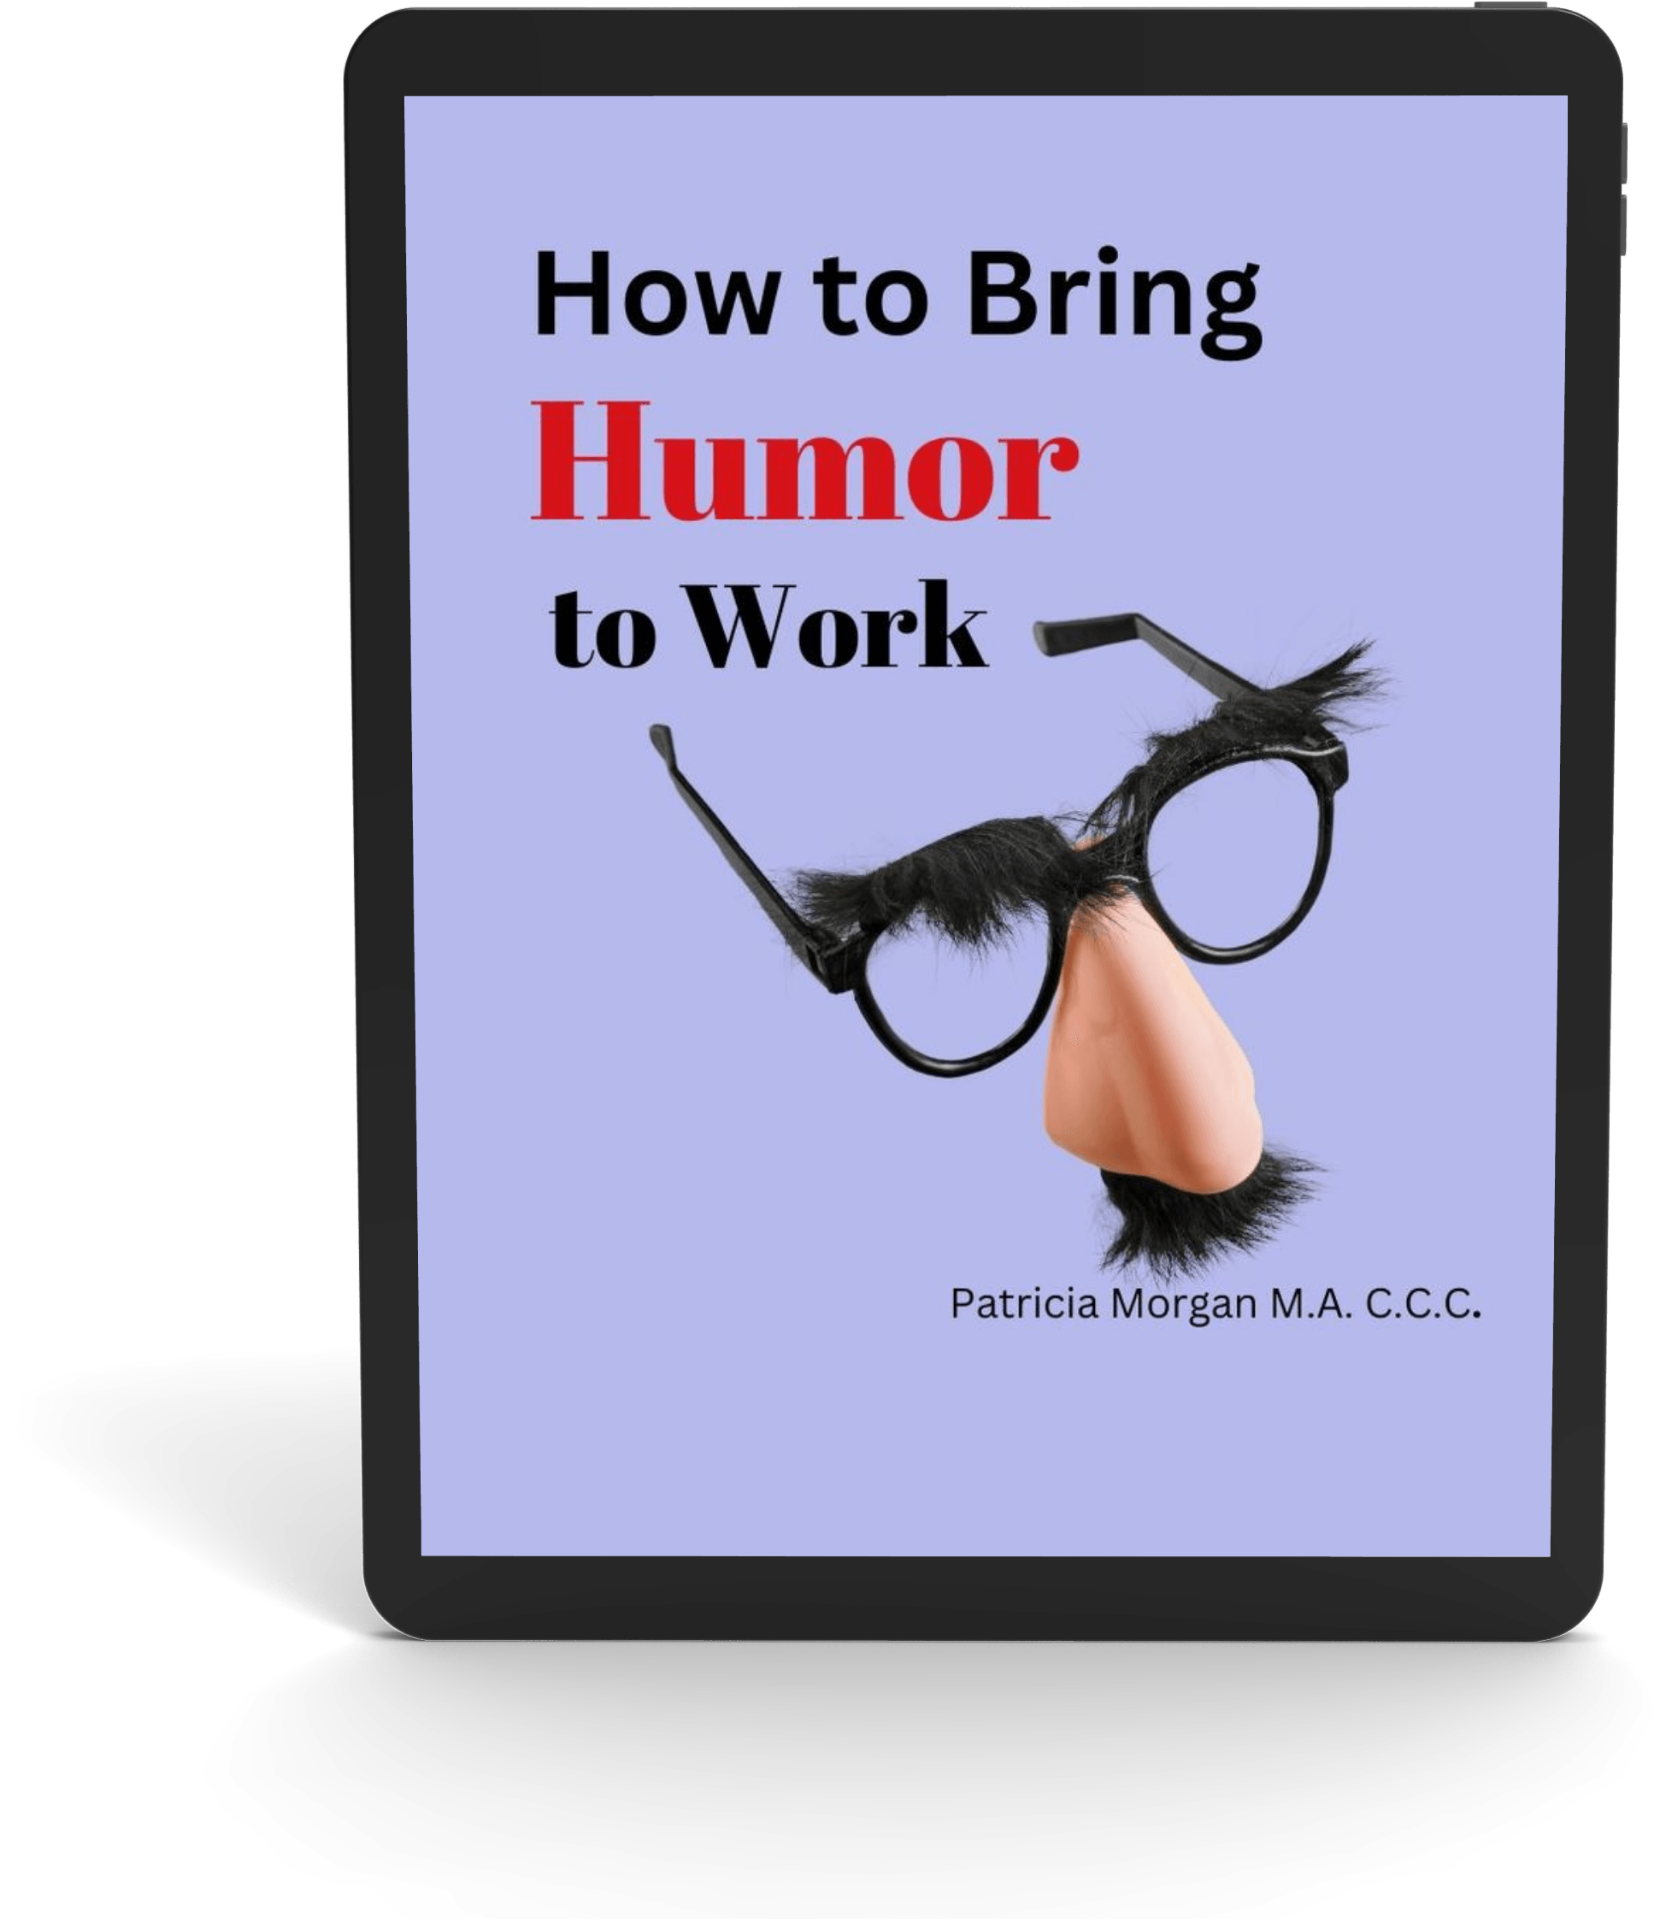 How to Bring Humor to Work